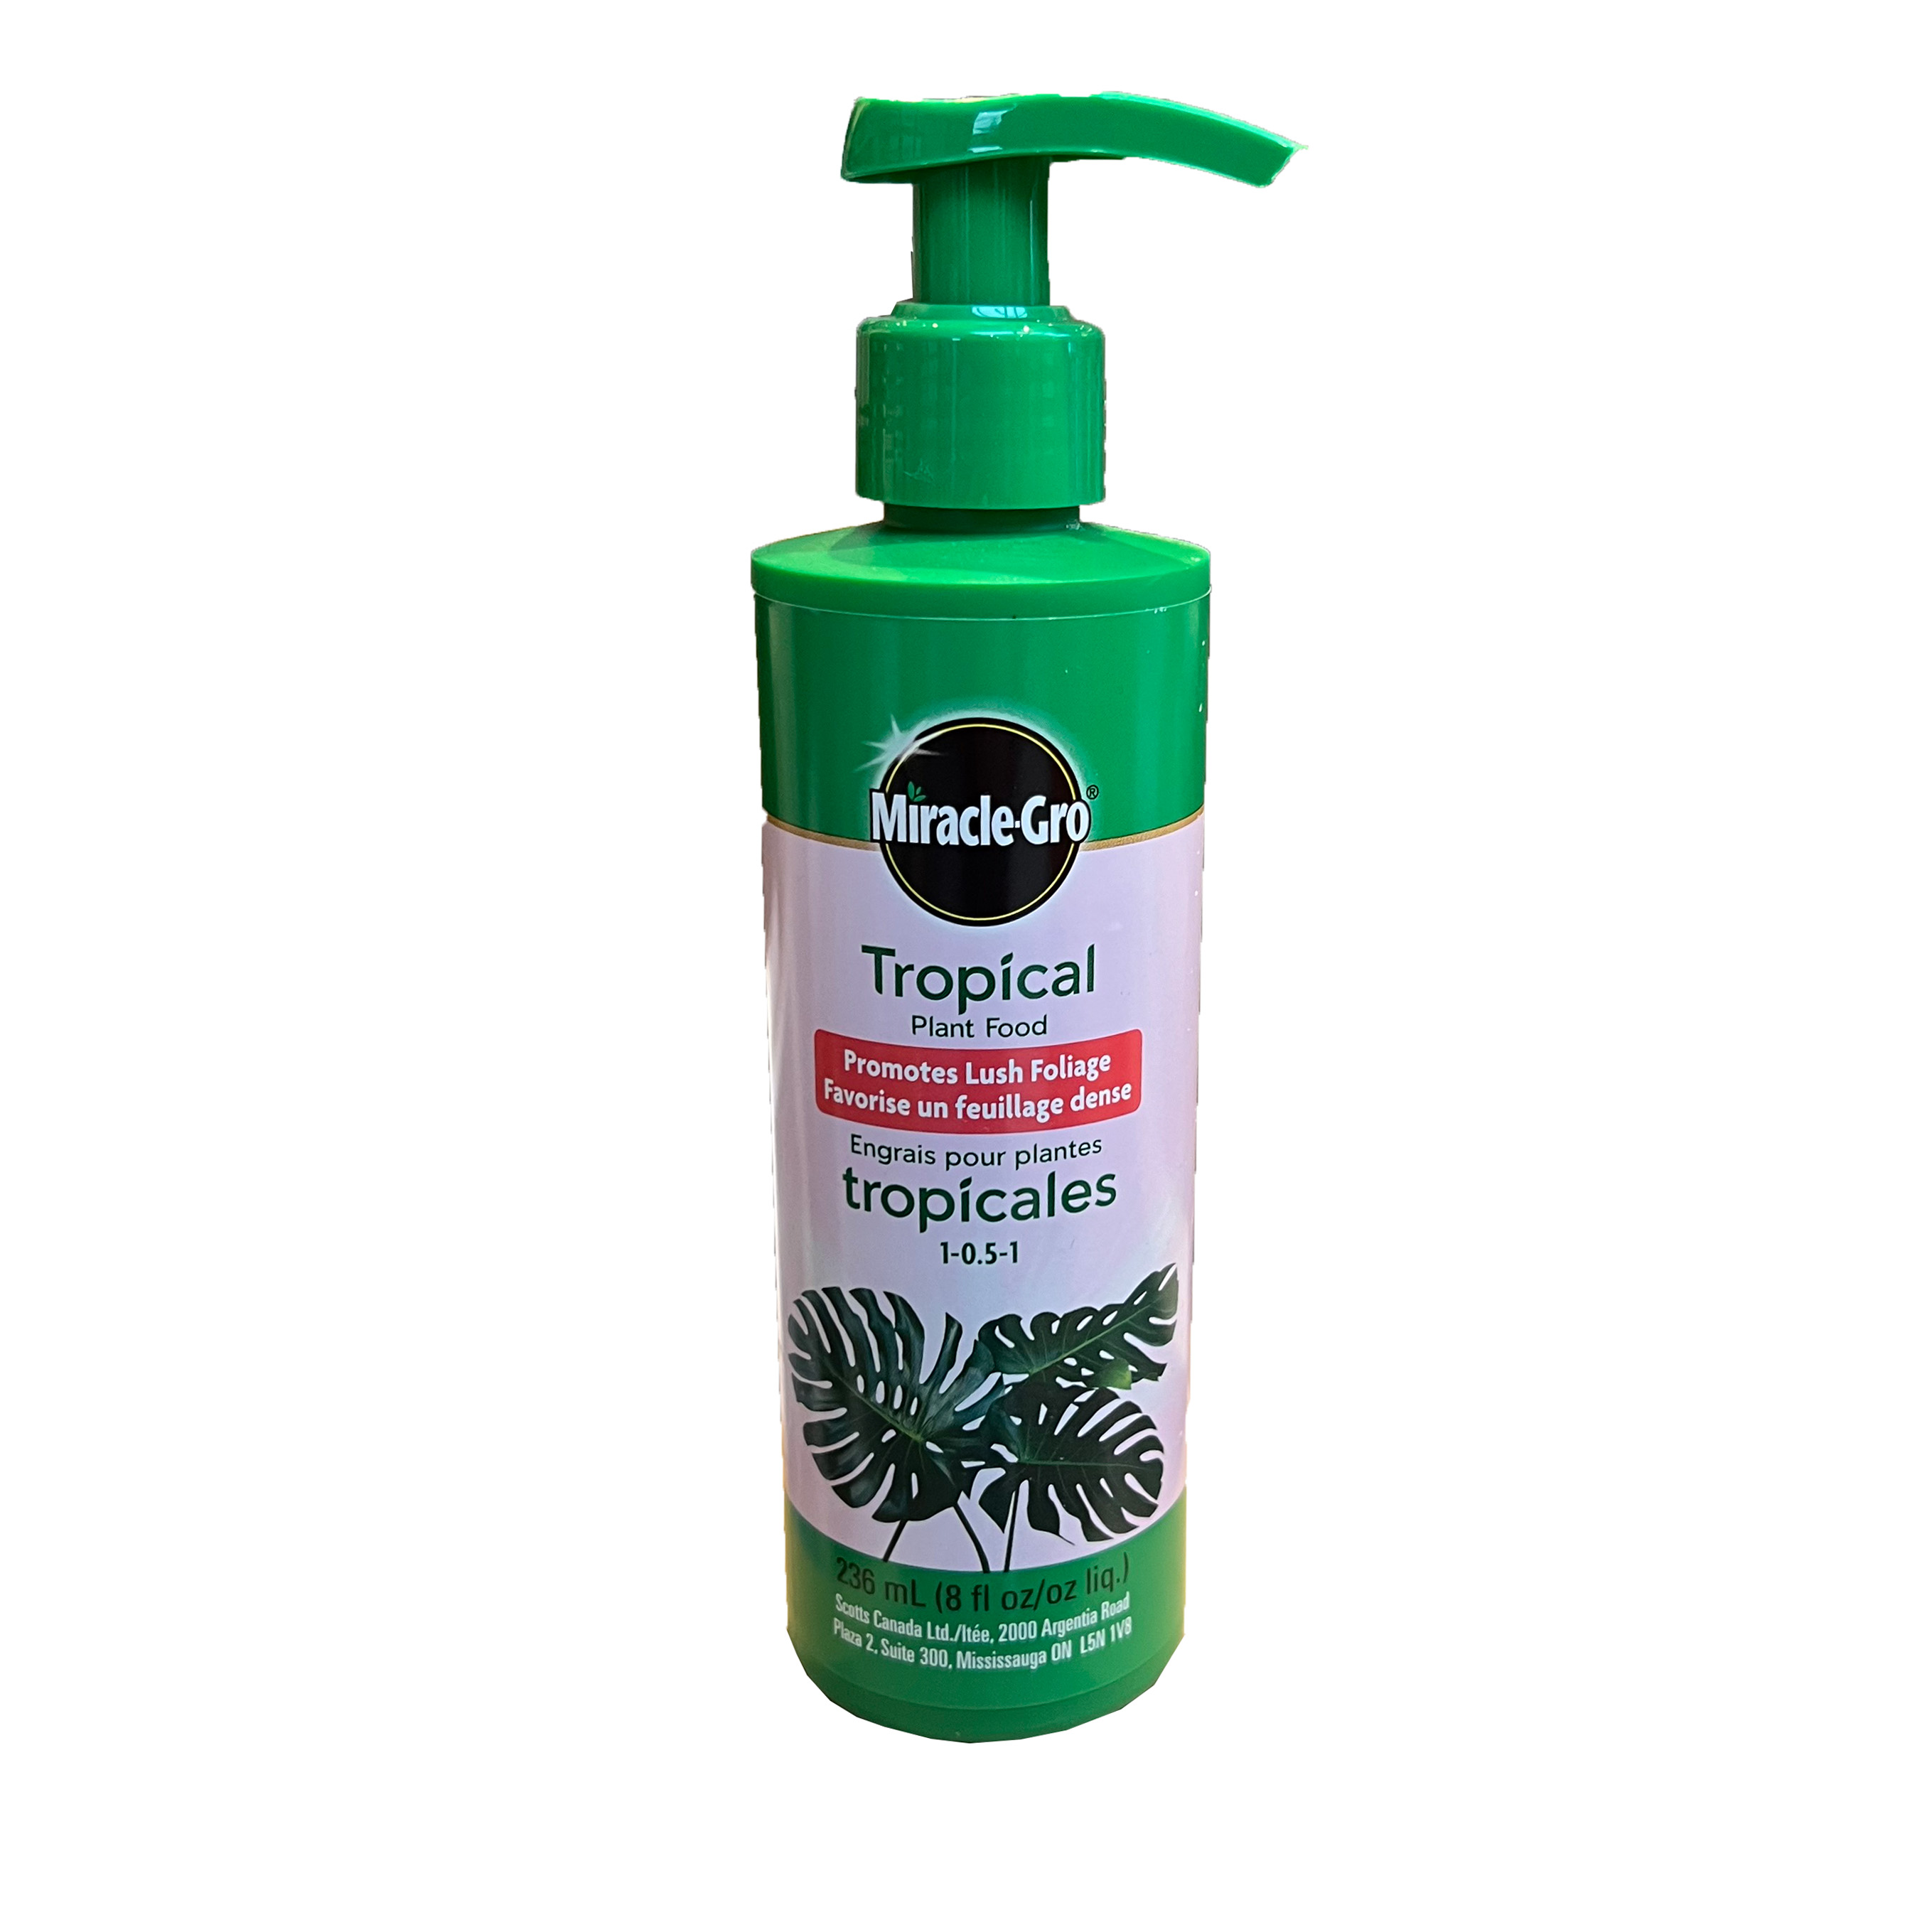 Miracle Gro Tropical Plant Food 1-0.5-1 236ml 